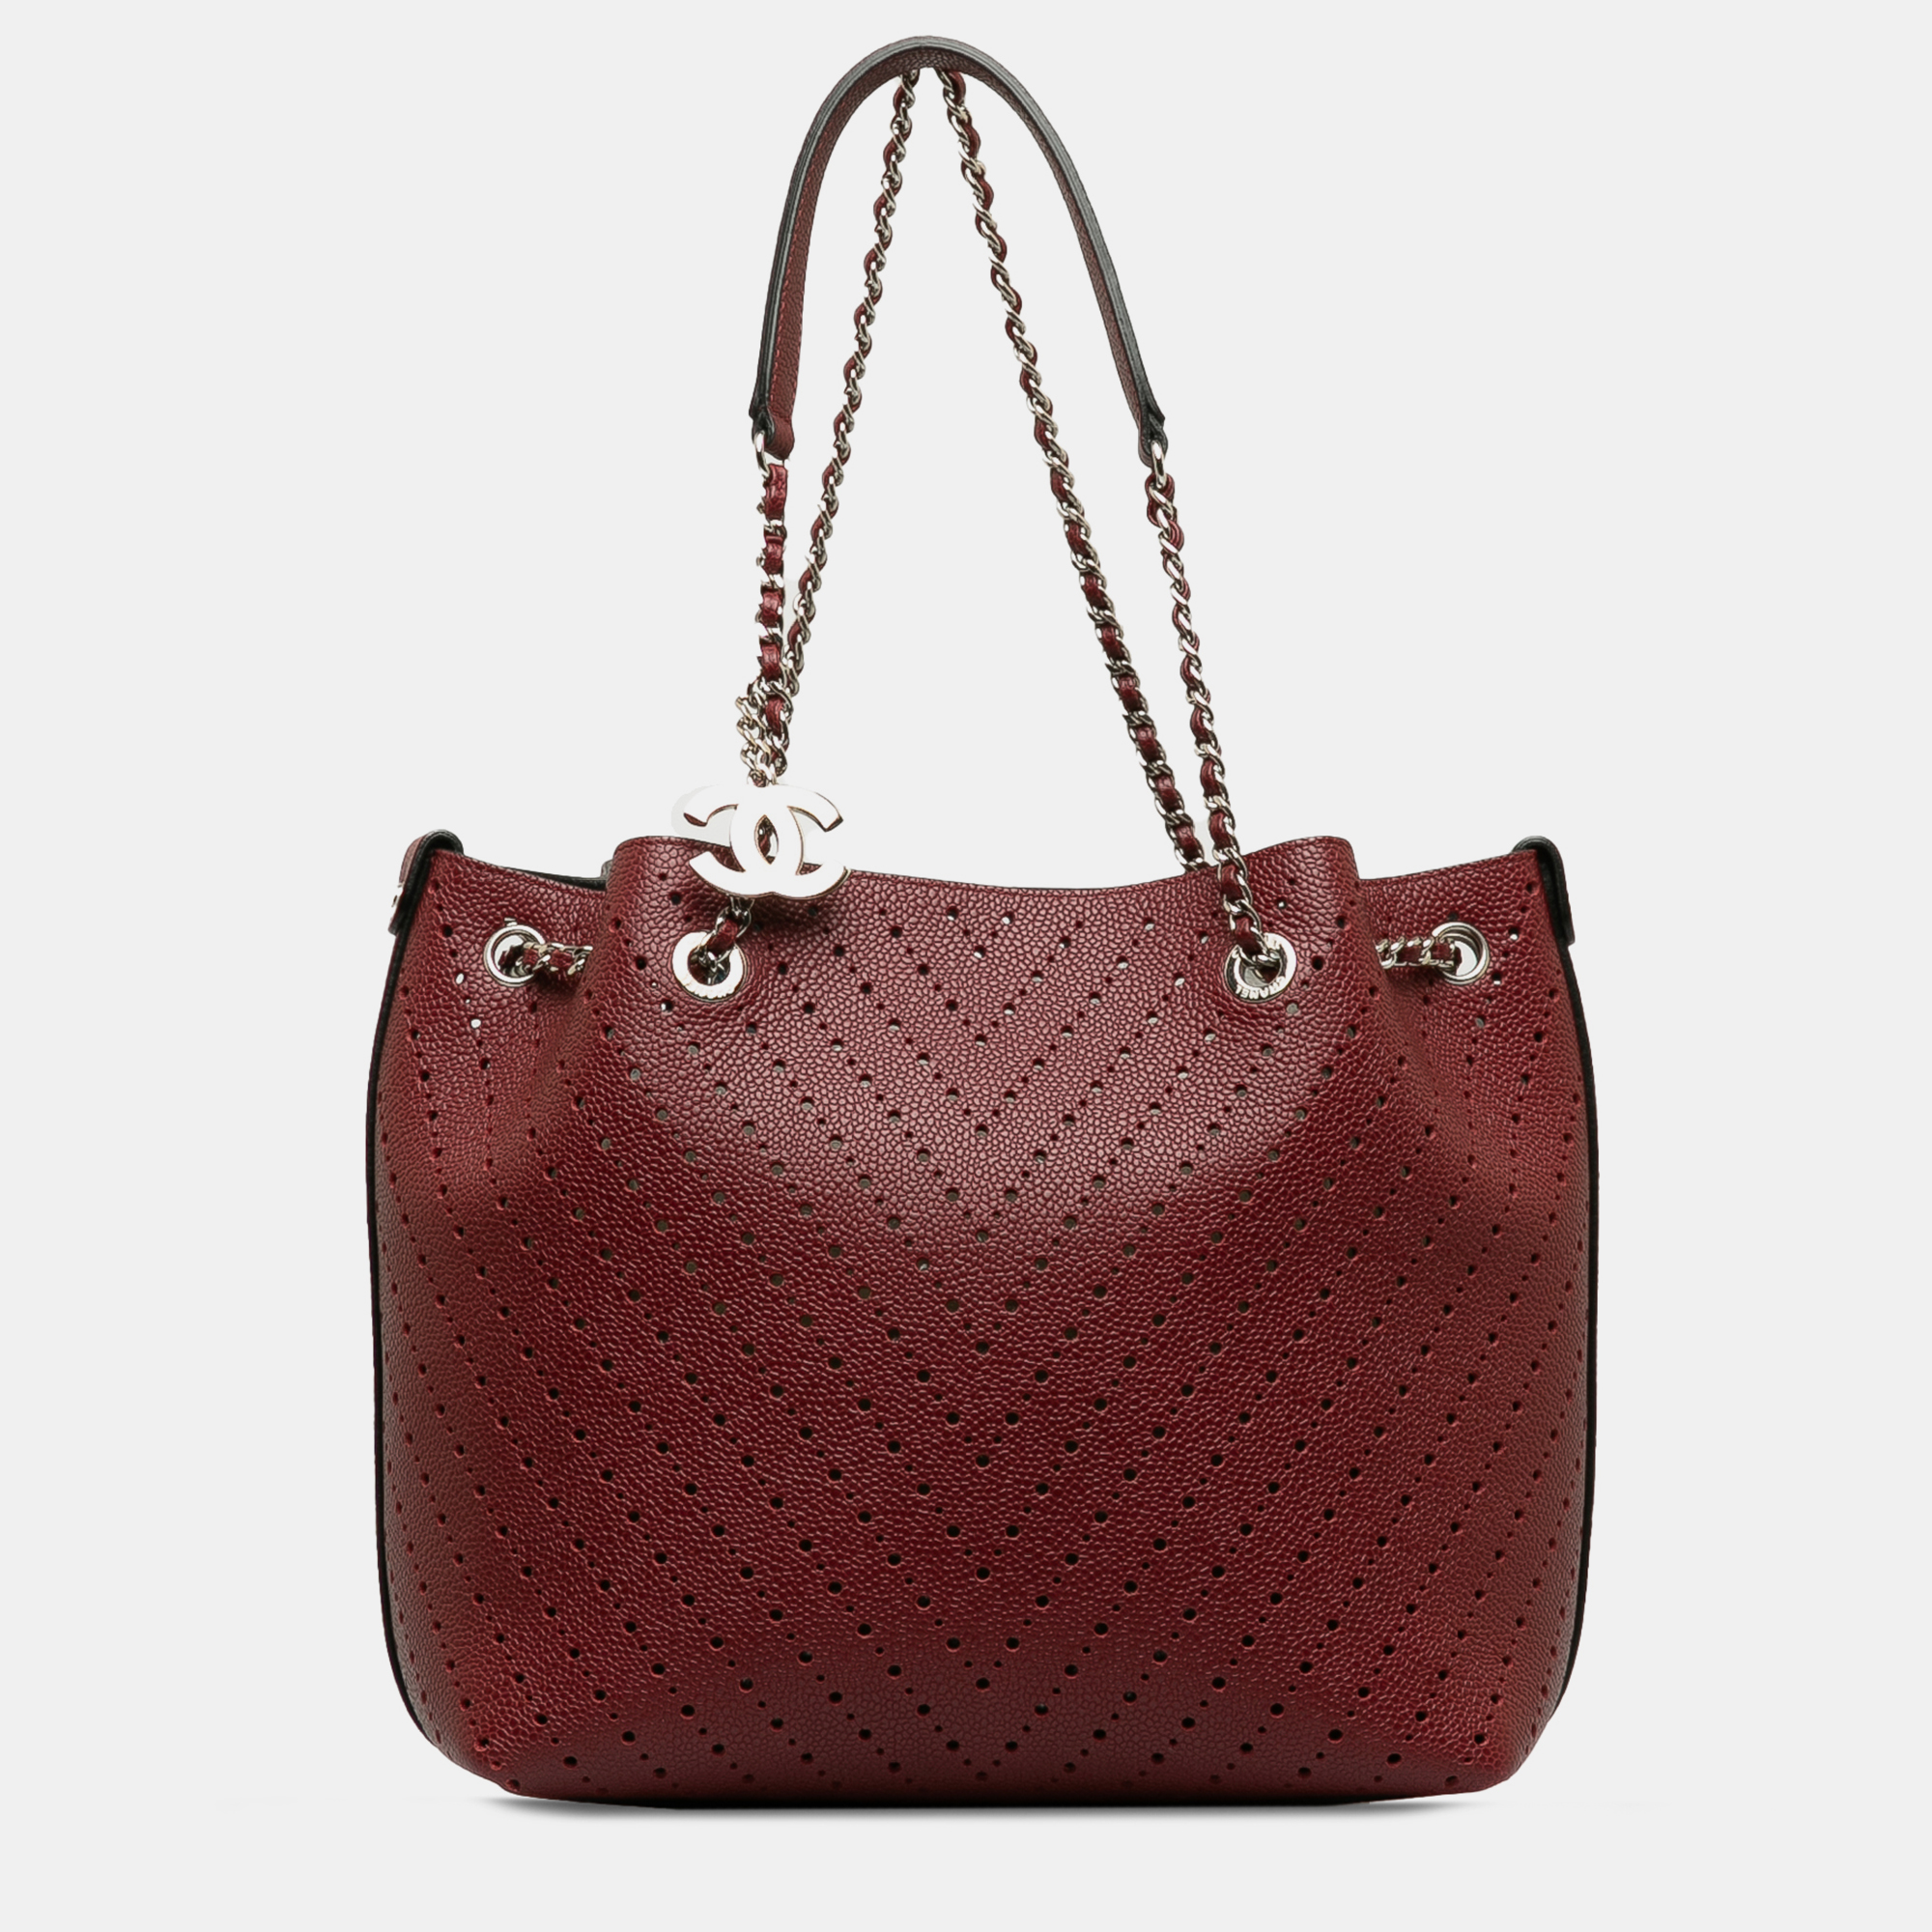 Chanel perforated caviar leather tote bag